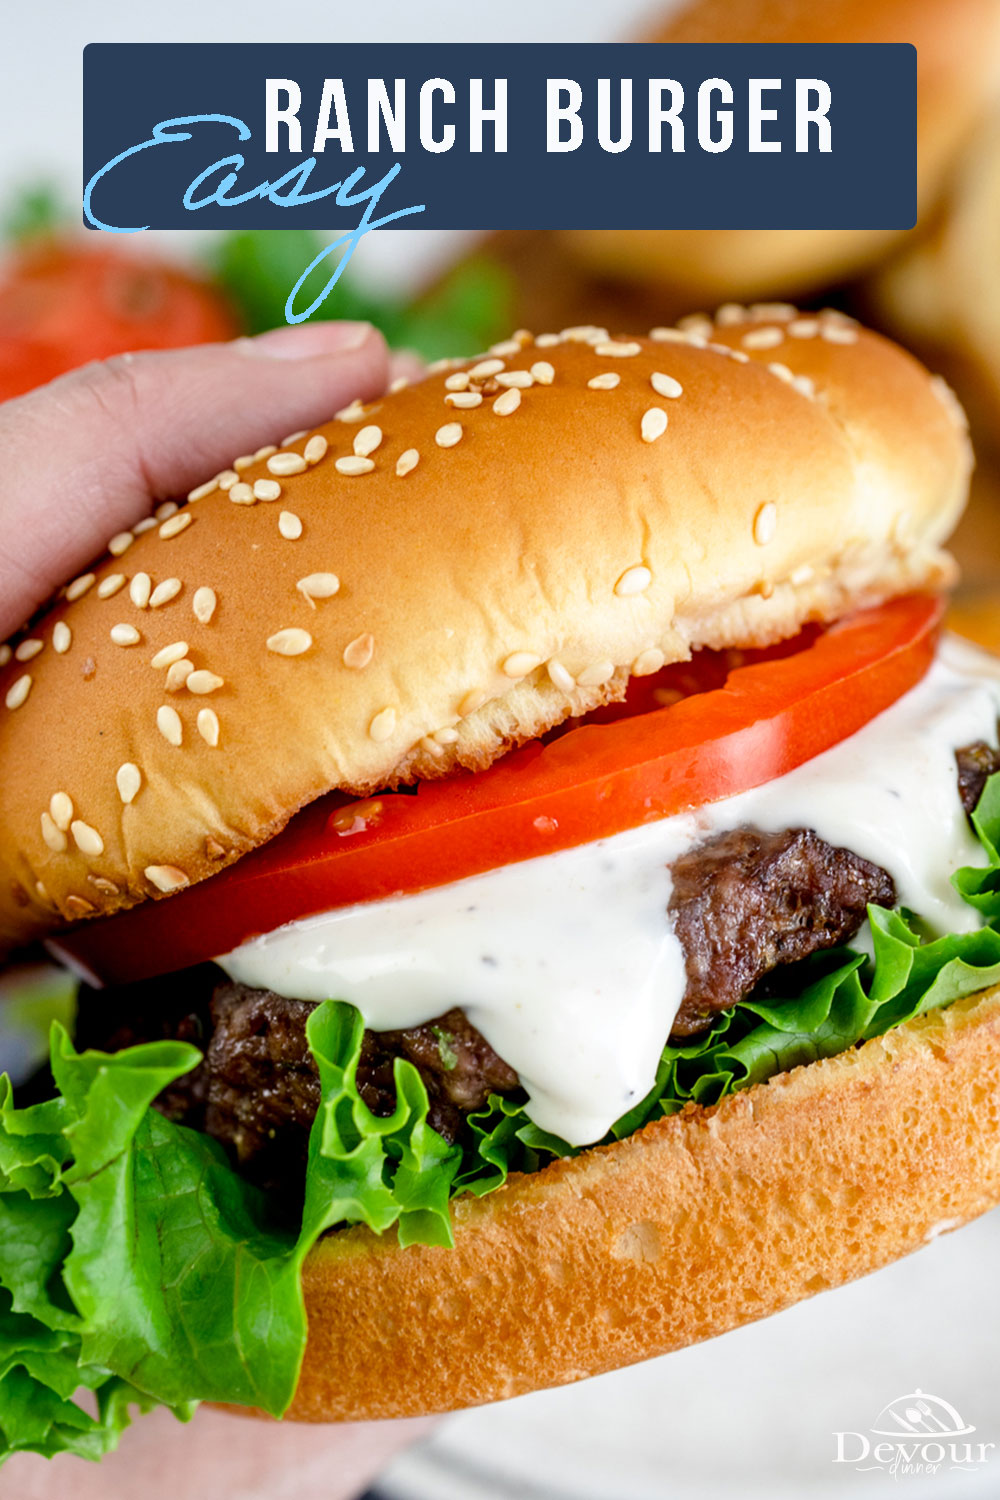 This easy Ranch Burger recipe makes a juicy, perfectly seasoned beef burger, topped with thick Ranch Dressing, Tomato, and Lettuce all in a delicious toasted bun. It's perfect for your next cookout, or for any time of the year - complete with Pan-Fried and Air Fryer instructions!